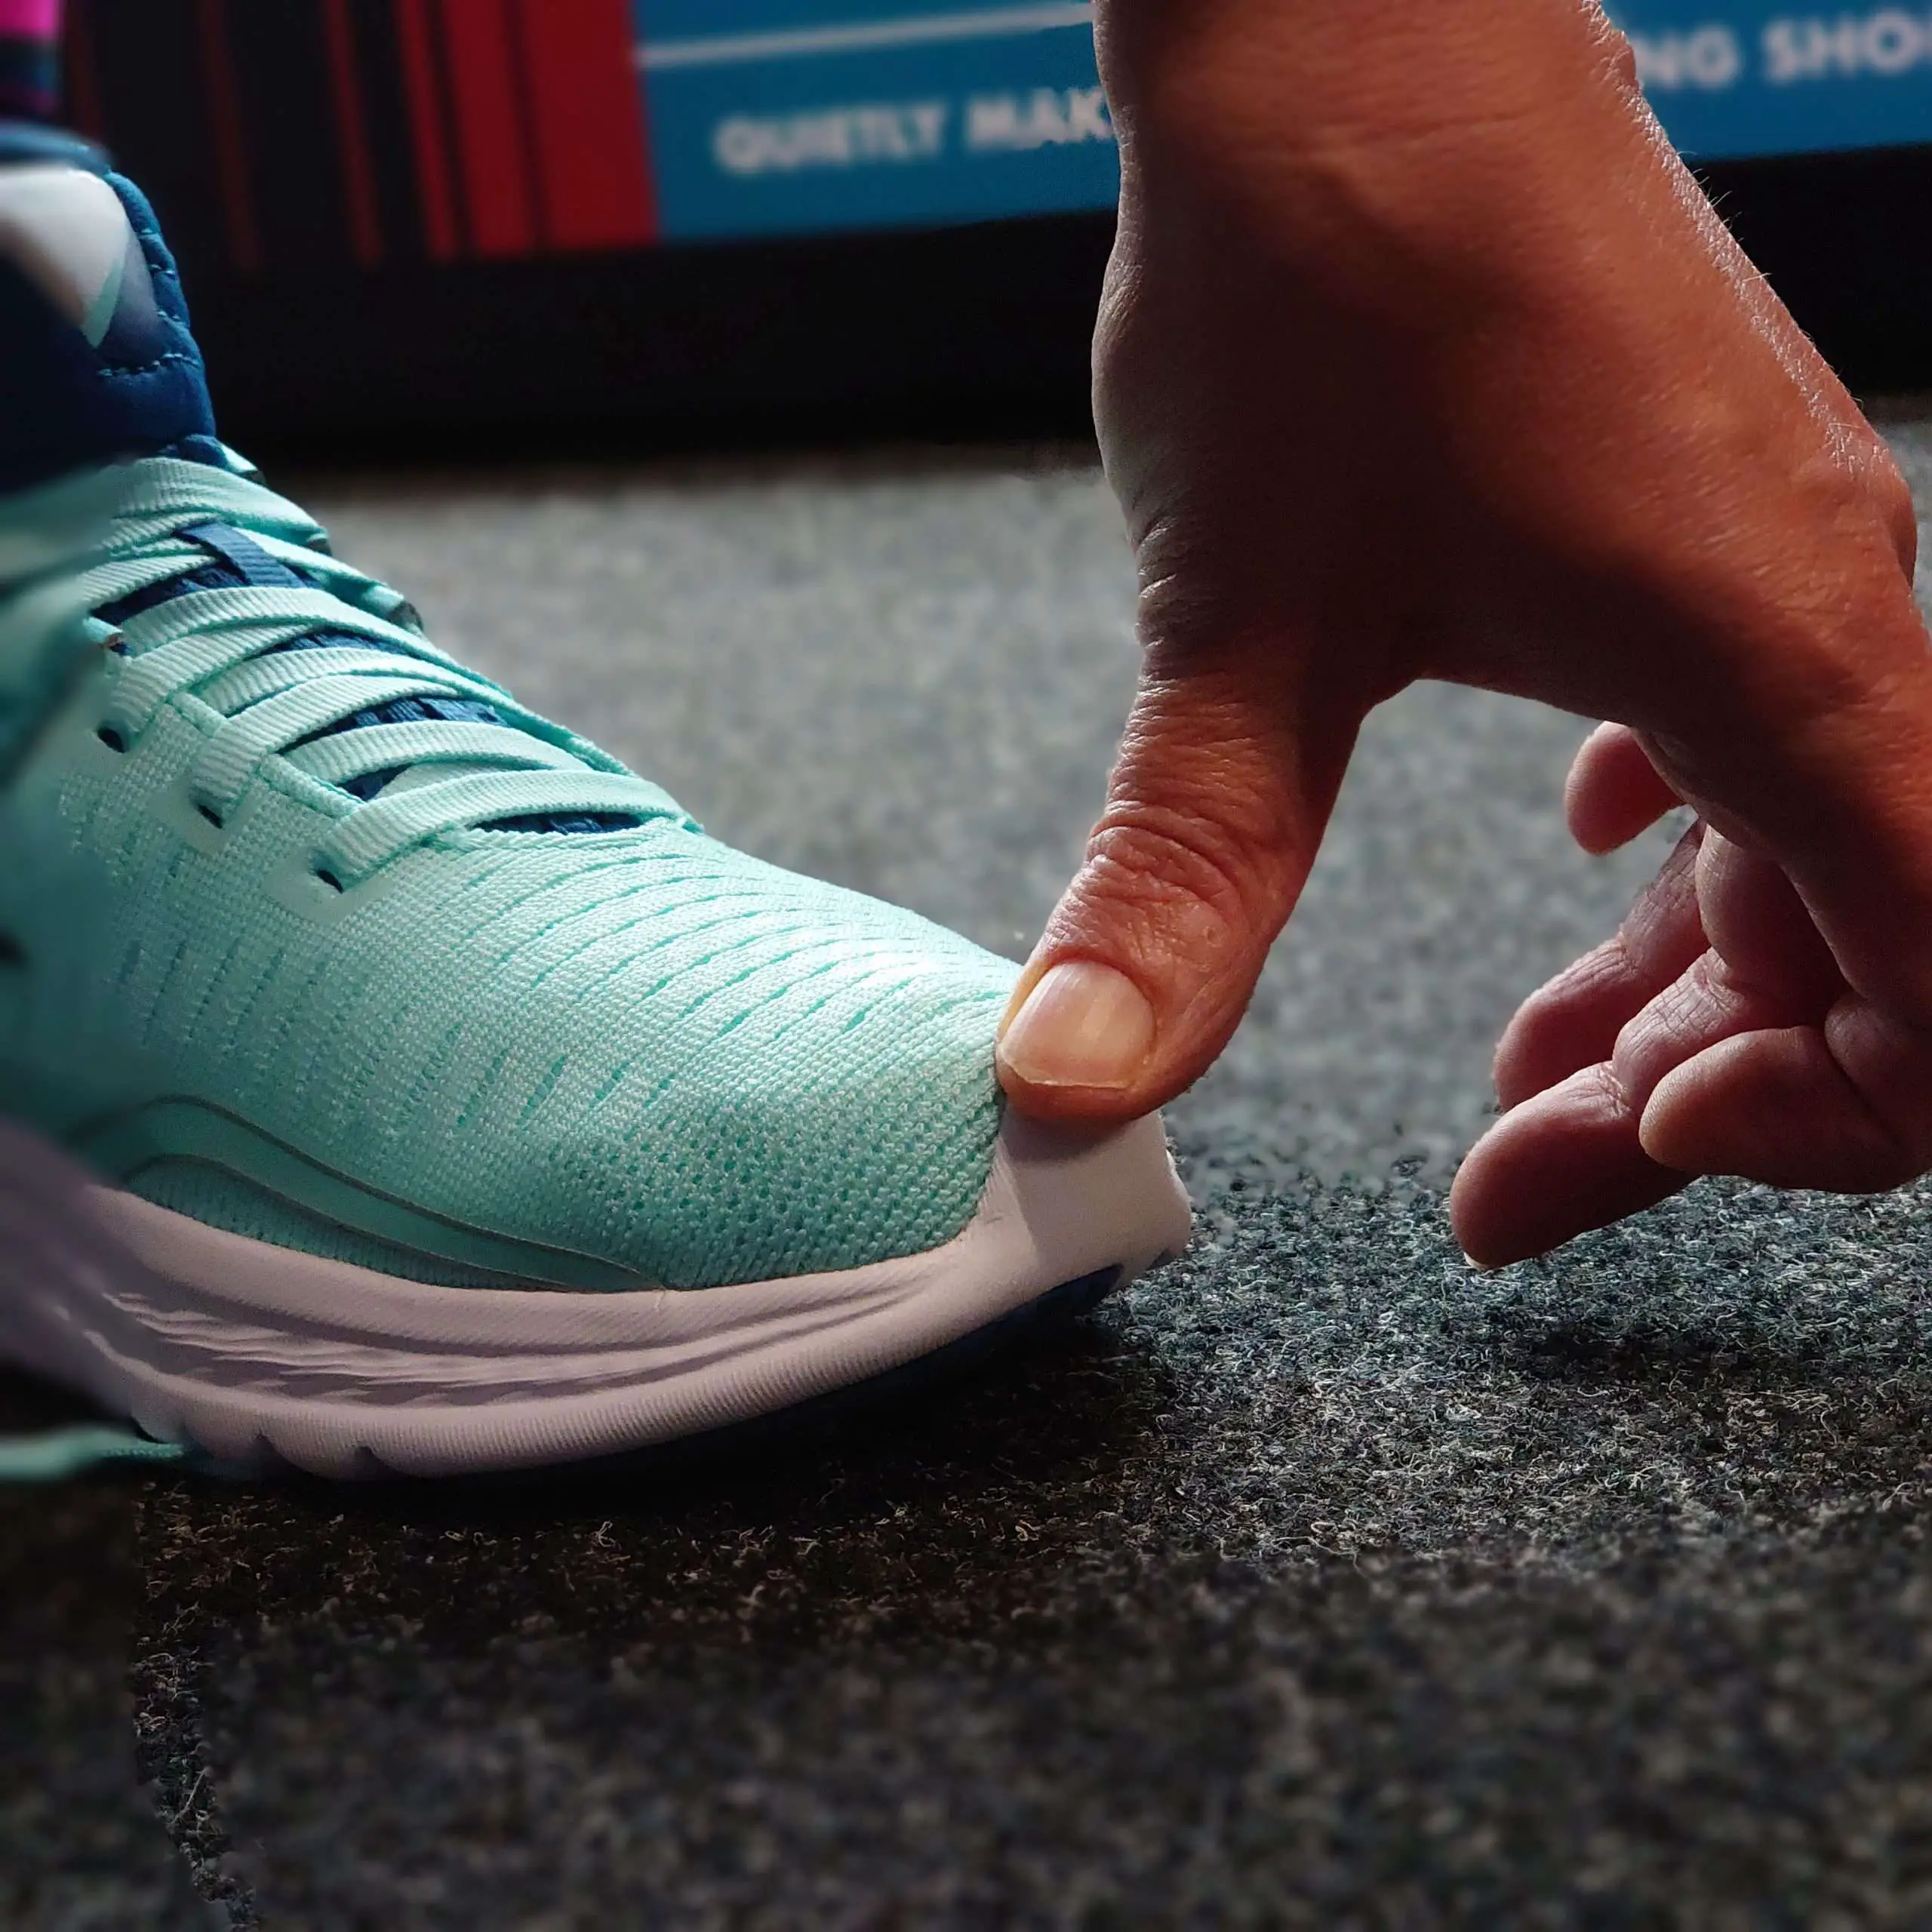 Do Your New Running Shoes Fit?